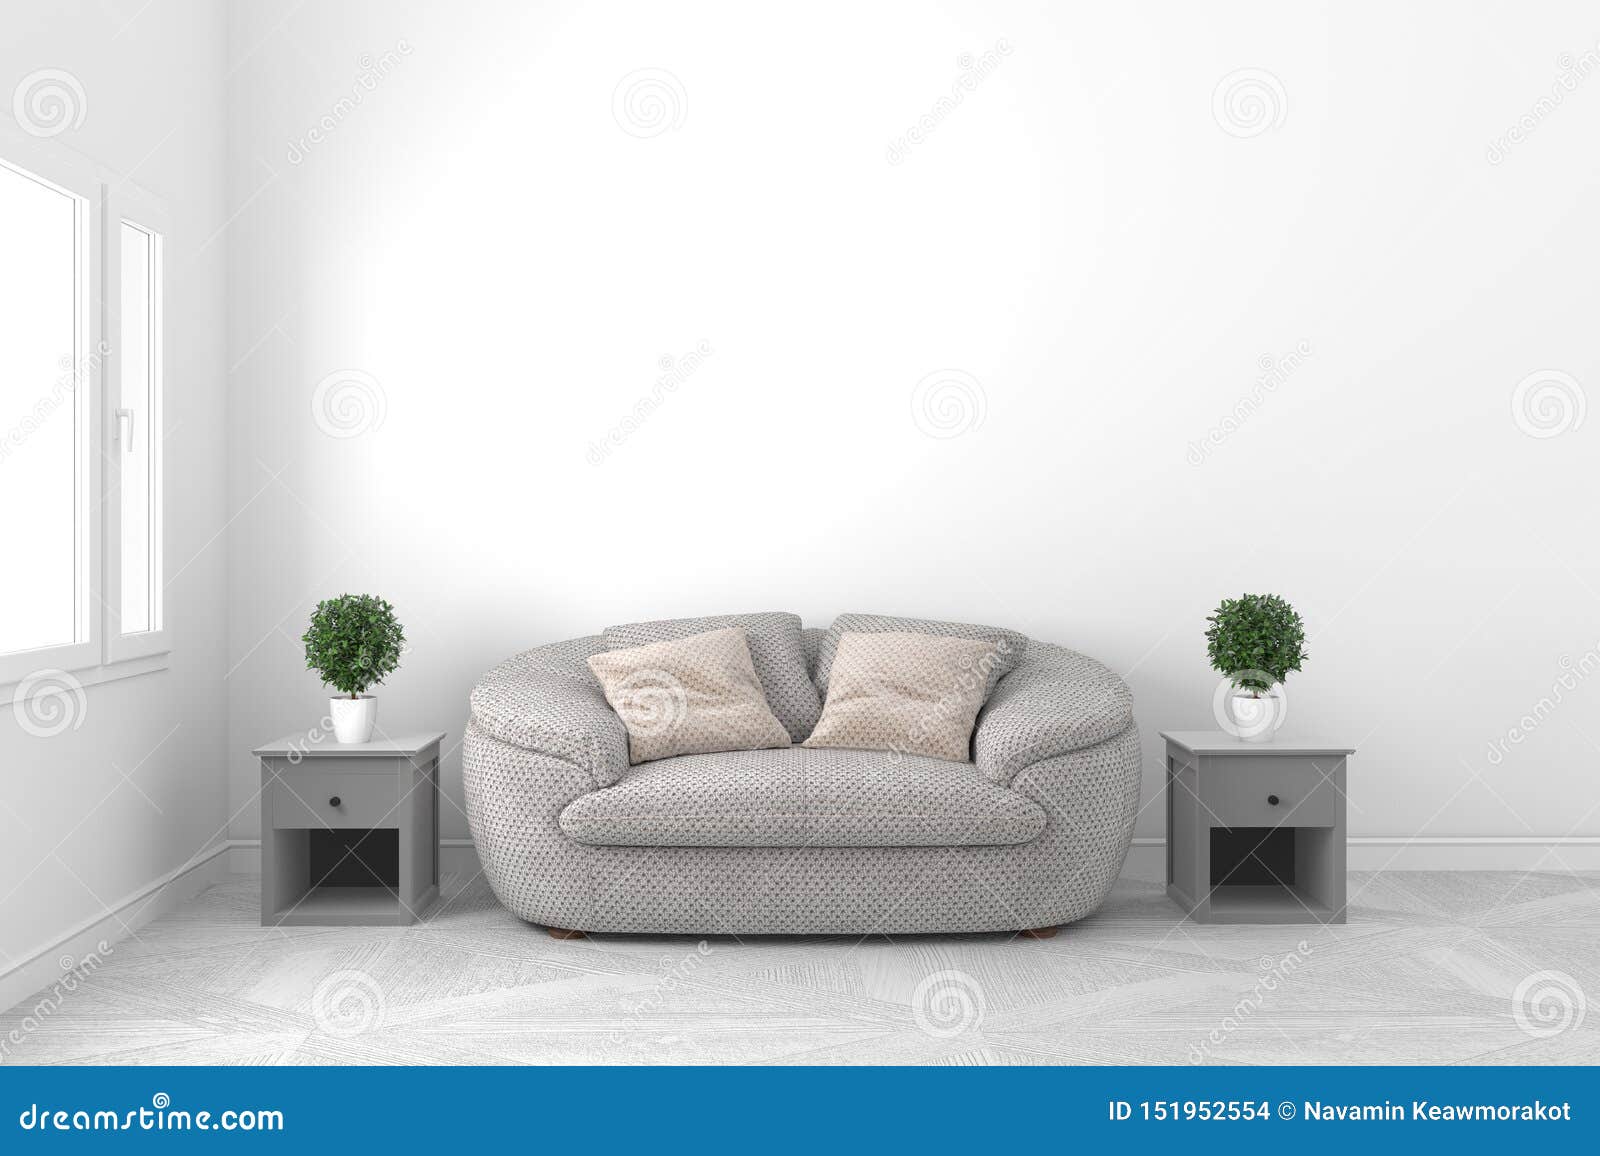 Beautiful White Empty Room-Living Room Interior Design - with Sofa and  Plants and Windows on Empty White Wall Background - Stock Illustration -  Illustration of modern, minimalism: 151952554